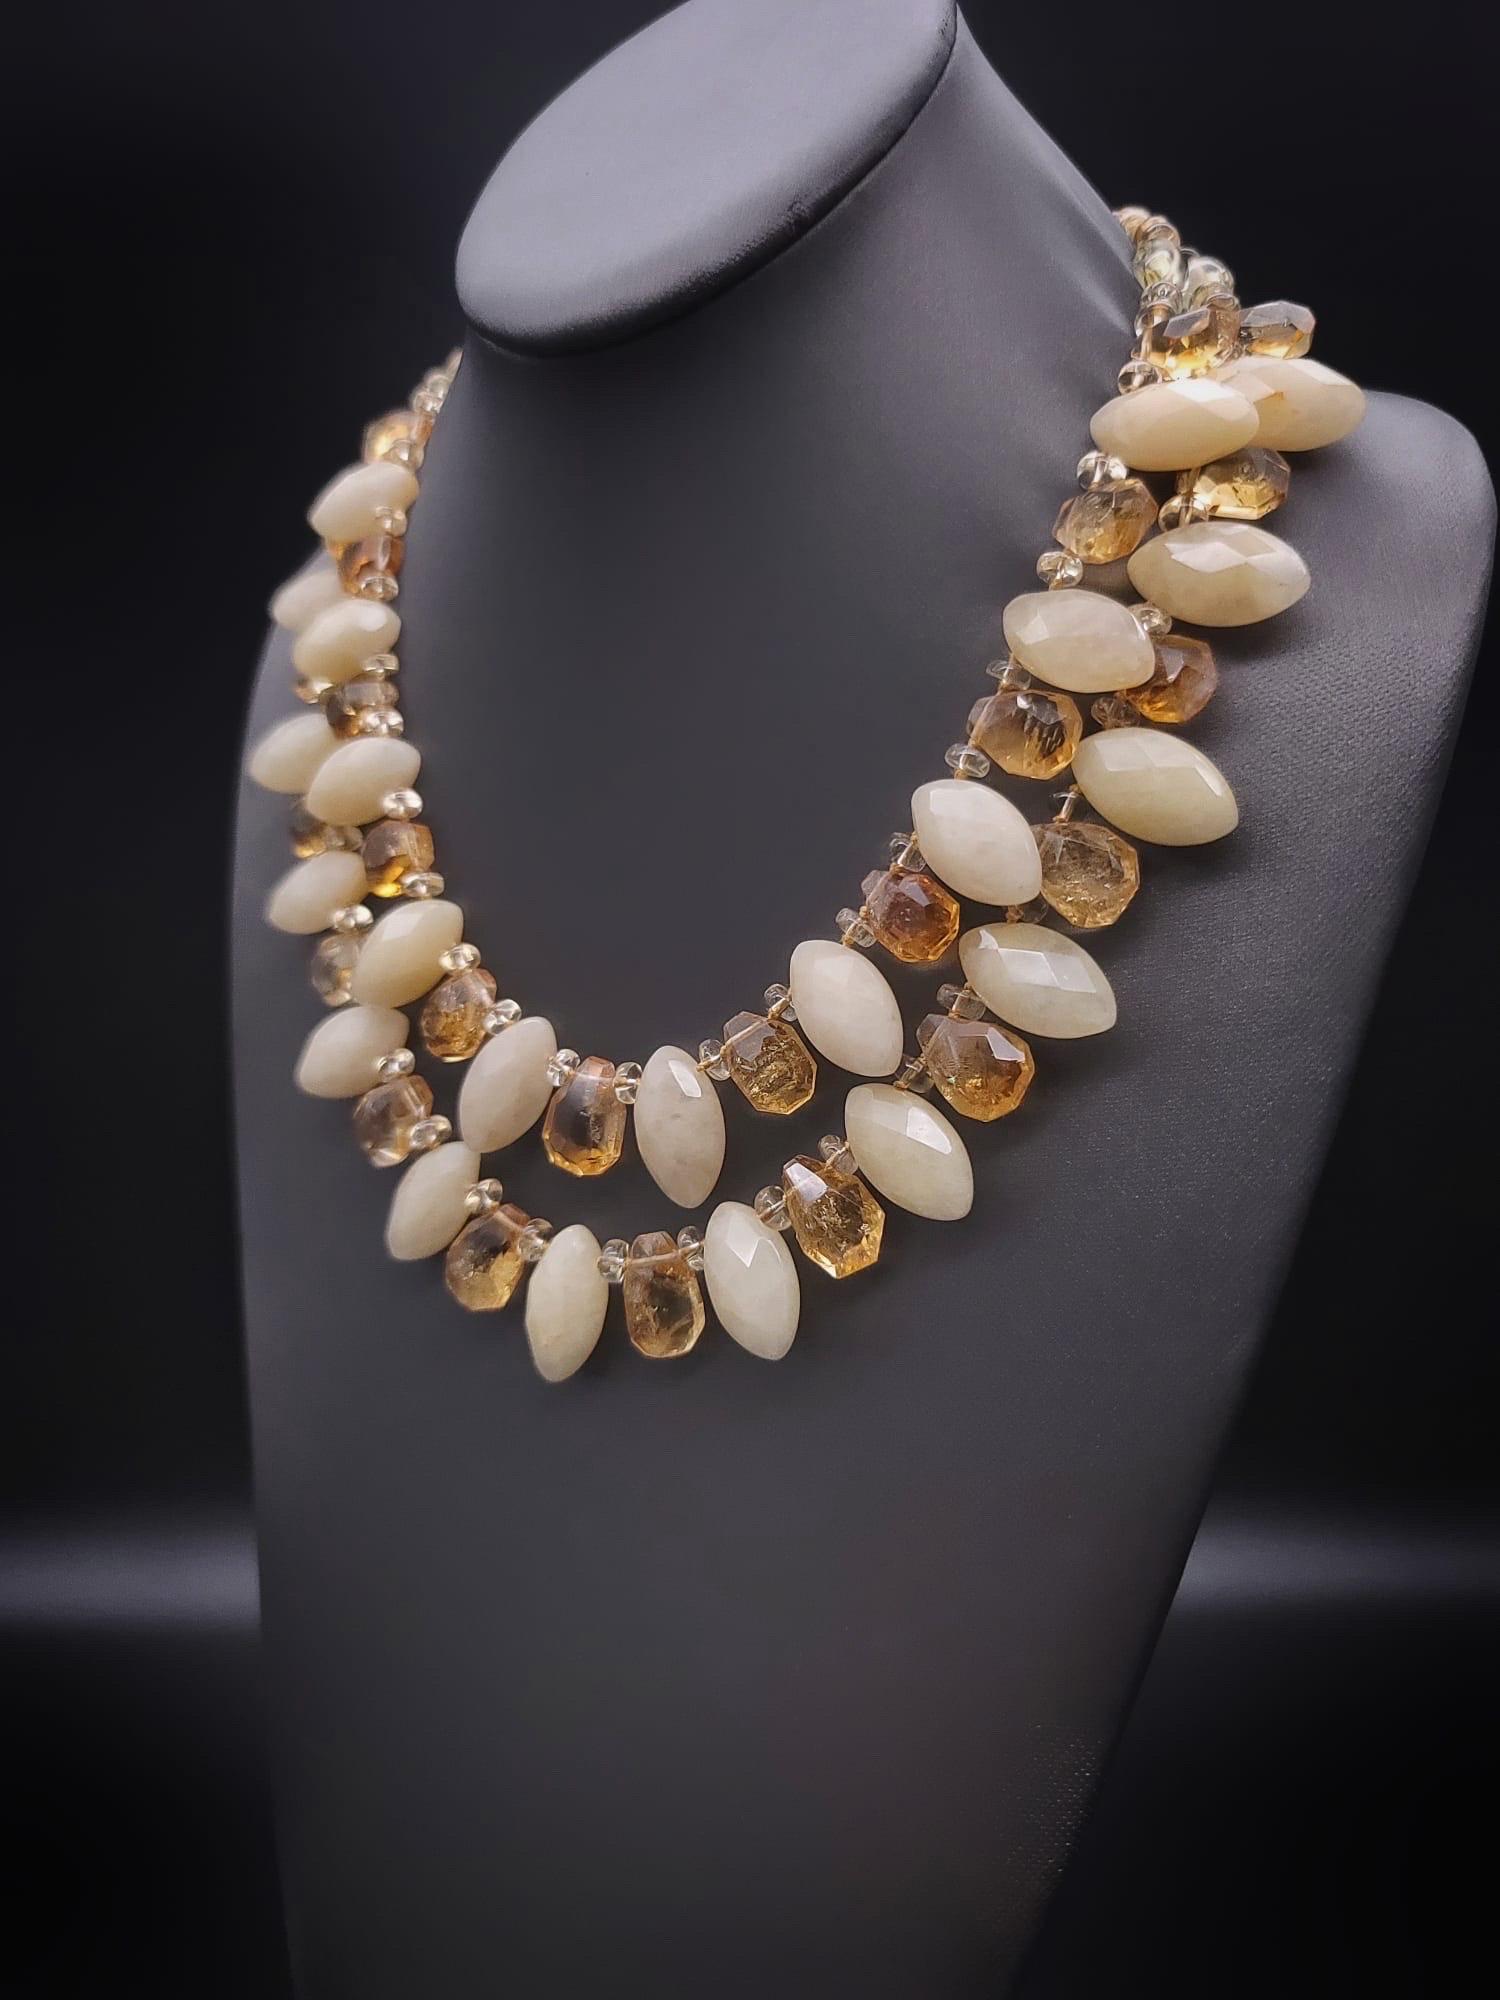 One-of-a-Kind

This stunning necklace is a true symphony of style and sophistication. Featuring two strands of transparent and translucent citrine, it's a piece that hits all the right notes. The necklace showcases faceted, polished transparent